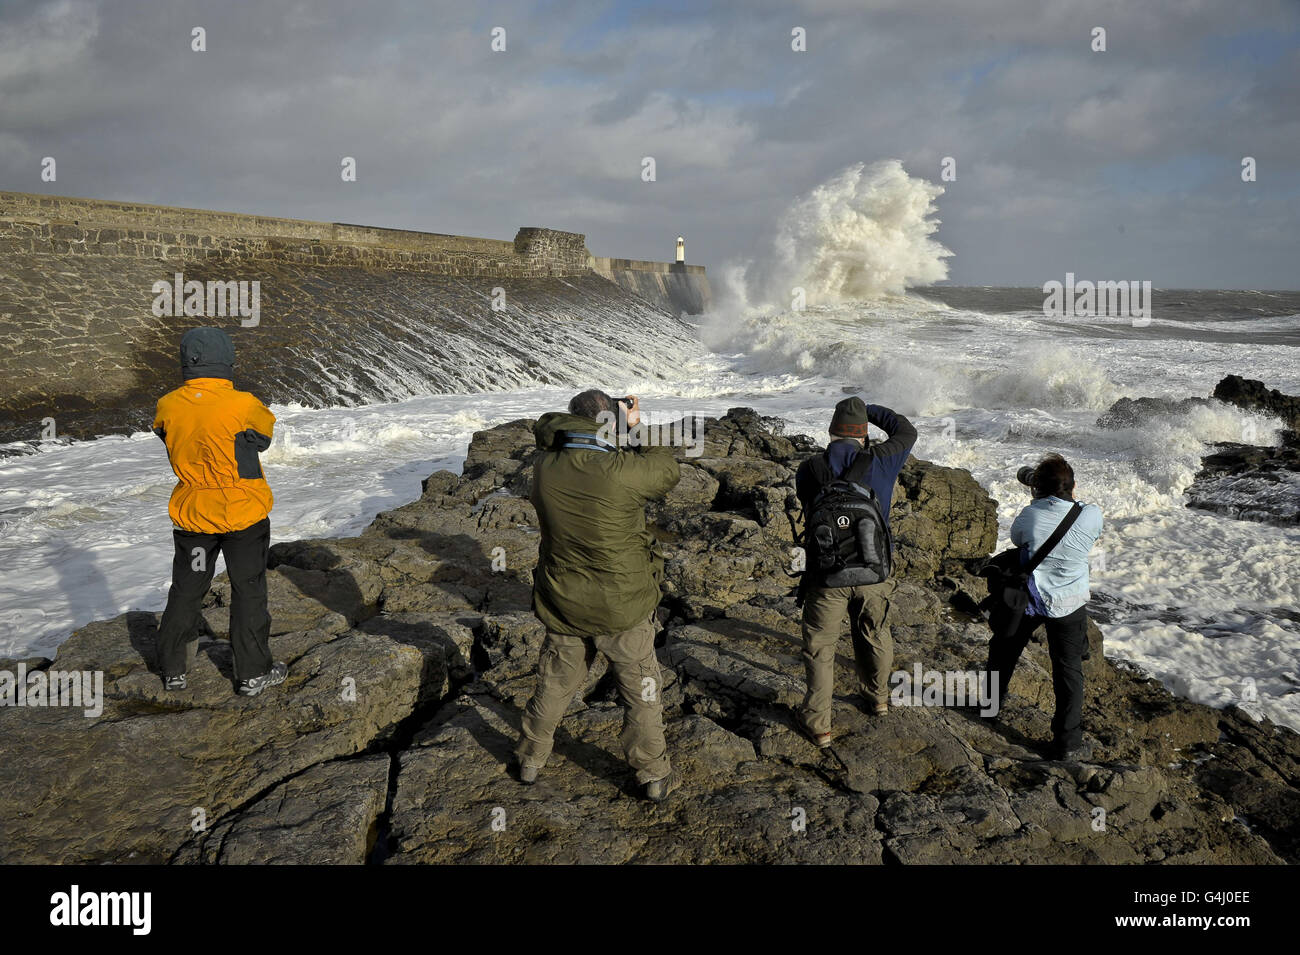 Photographers gather to take photographs of the waves striking the harbour wall at Porthcawl, Wales as the remnants of Hurricane Katia hit British shores. Stock Photo